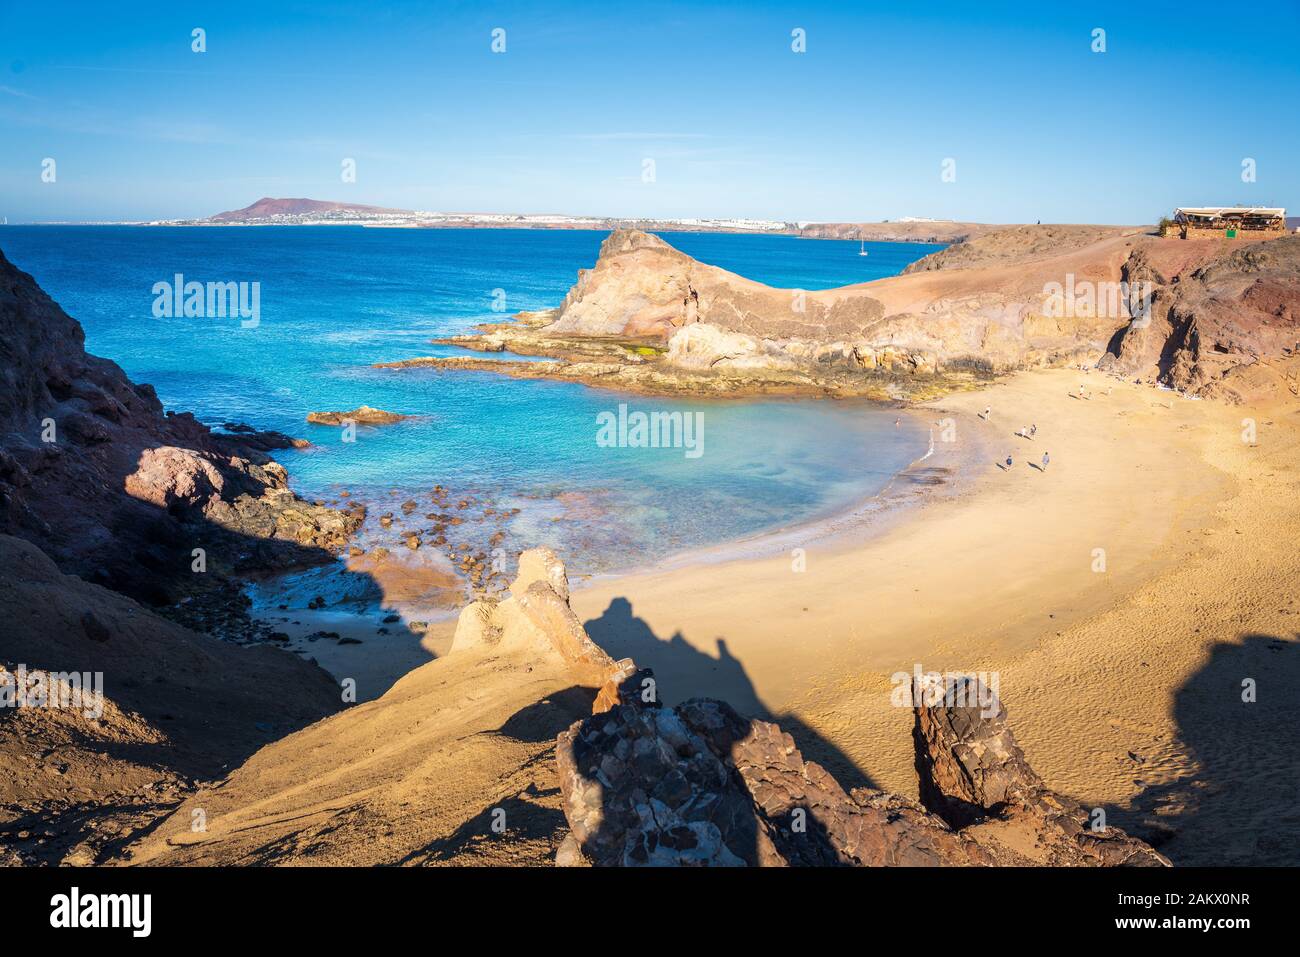 Playa de Papagayo, wild and lonely beach in Lanzarote, Canary Islands. Stock Photo